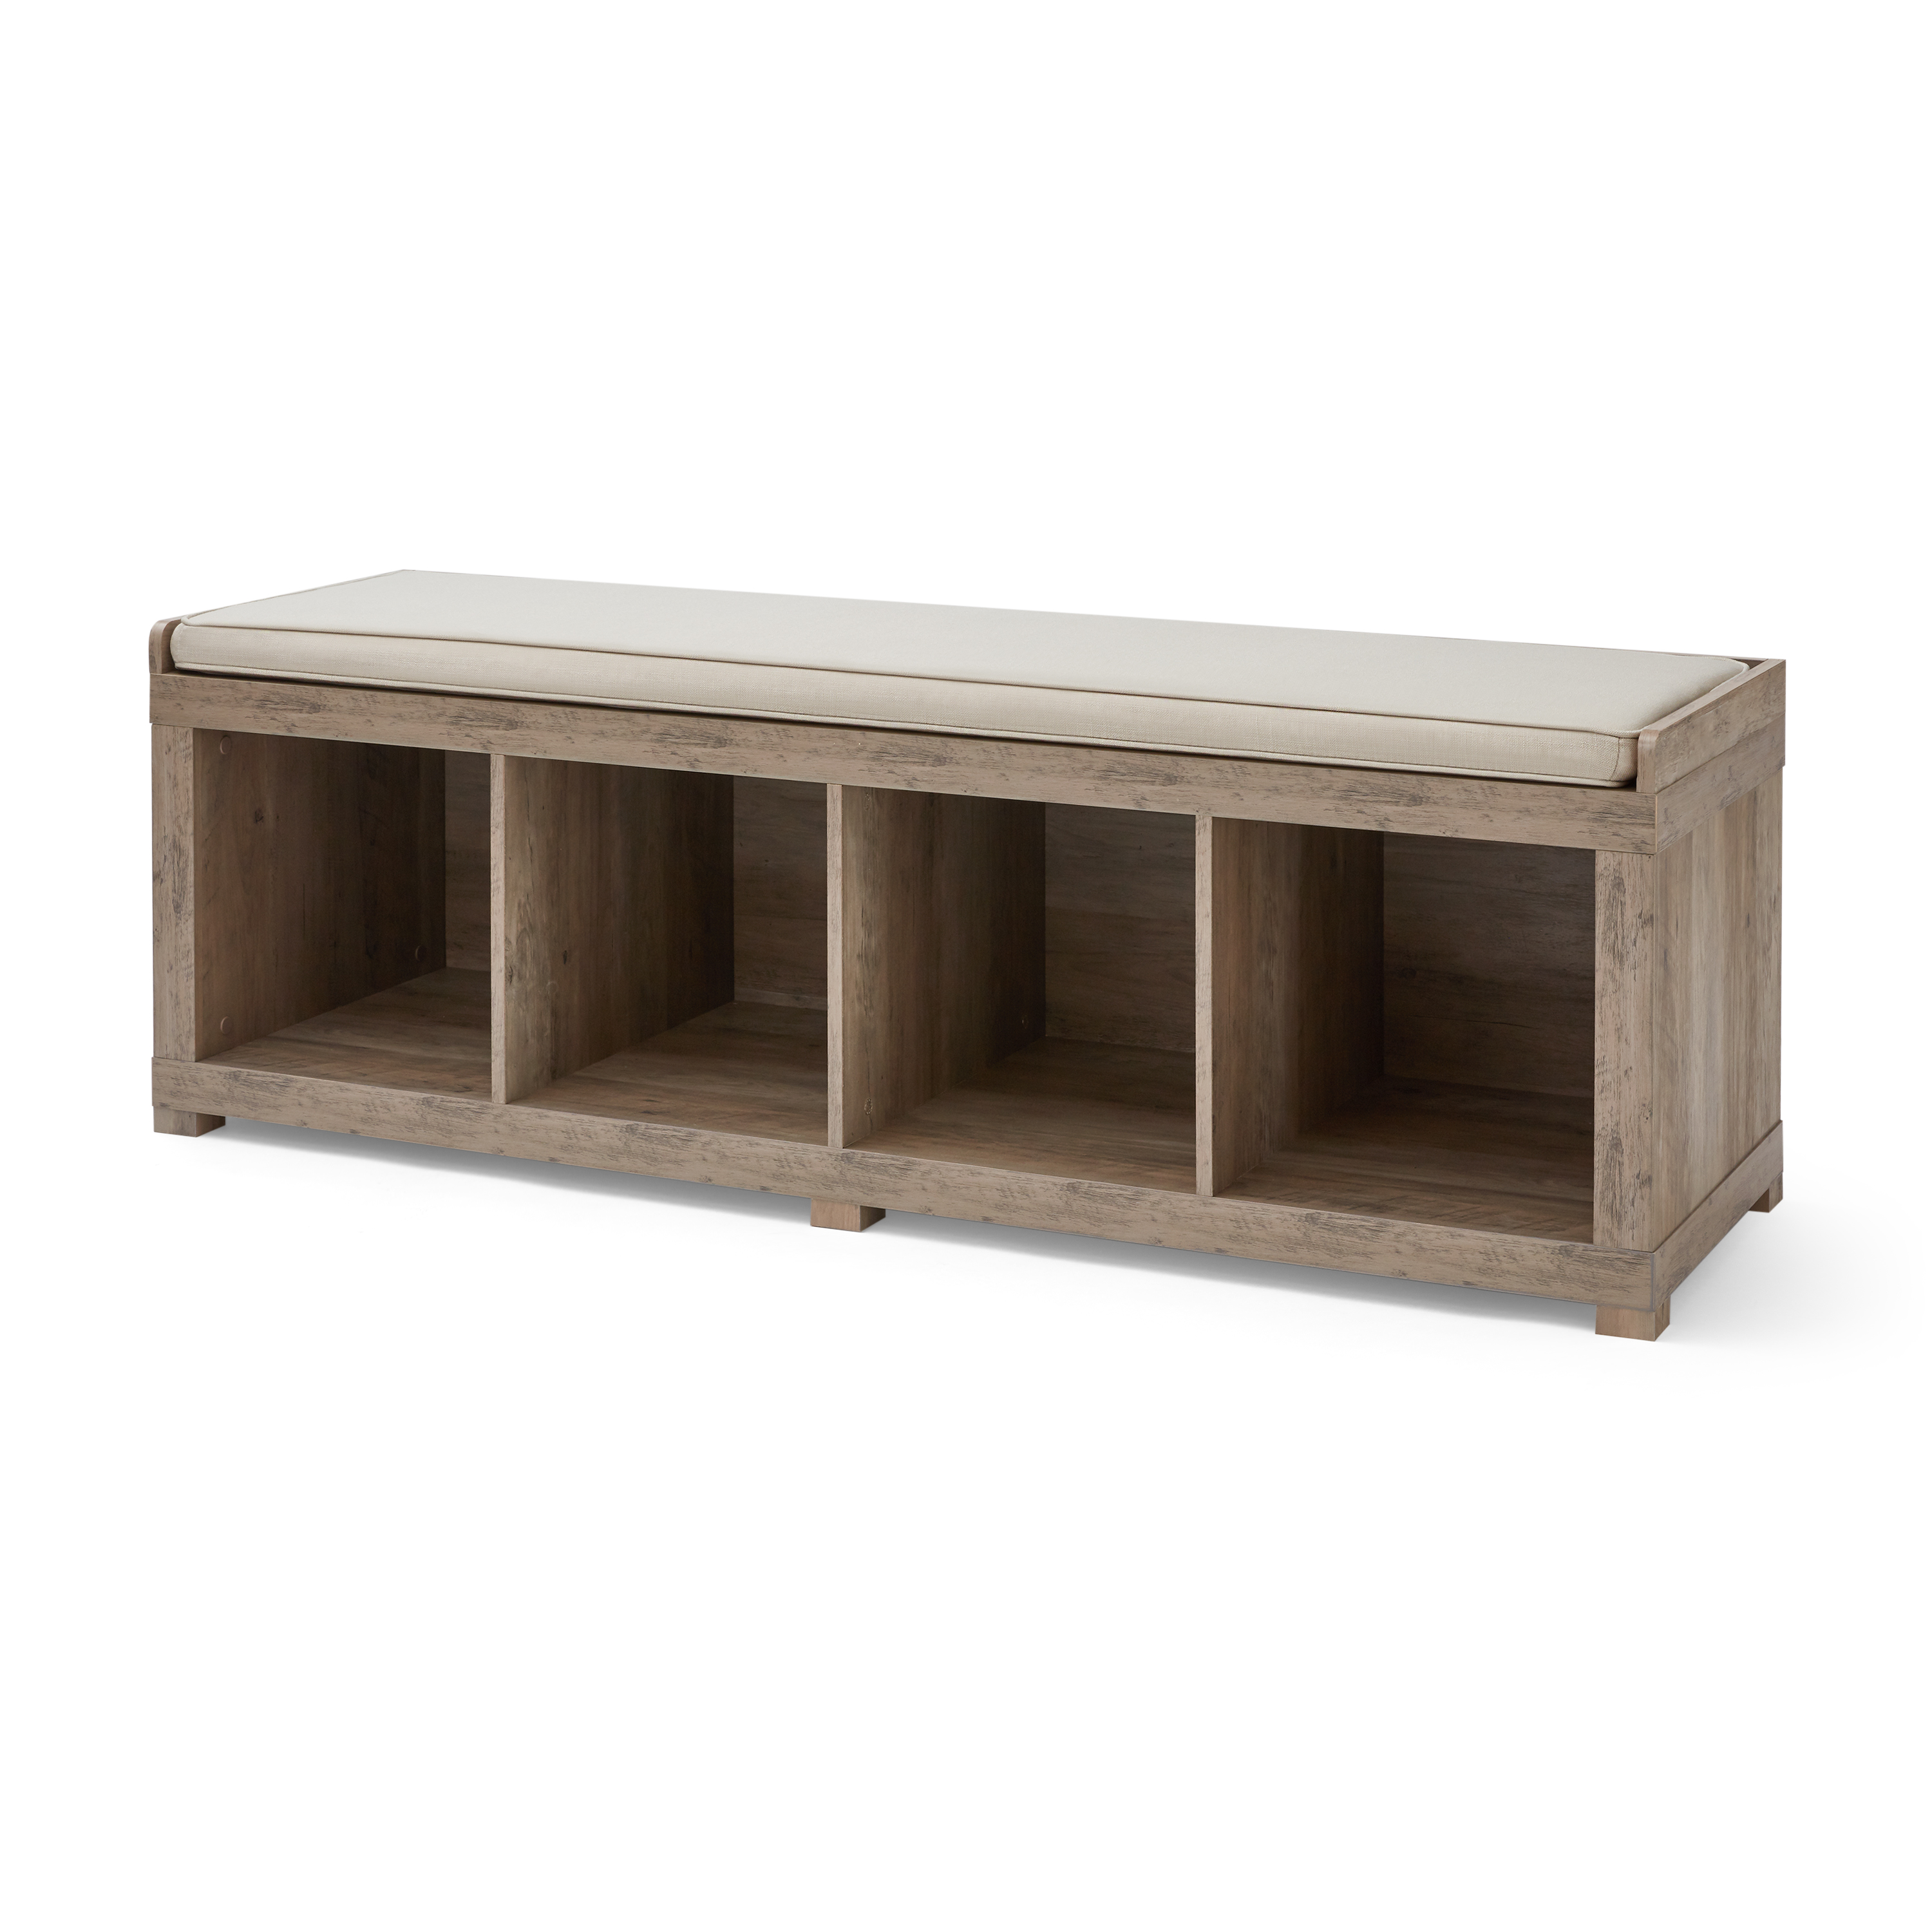 Better Homes & Gardens 4-Cube Shoe Storage Bench, Rustic Gray - image 2 of 7